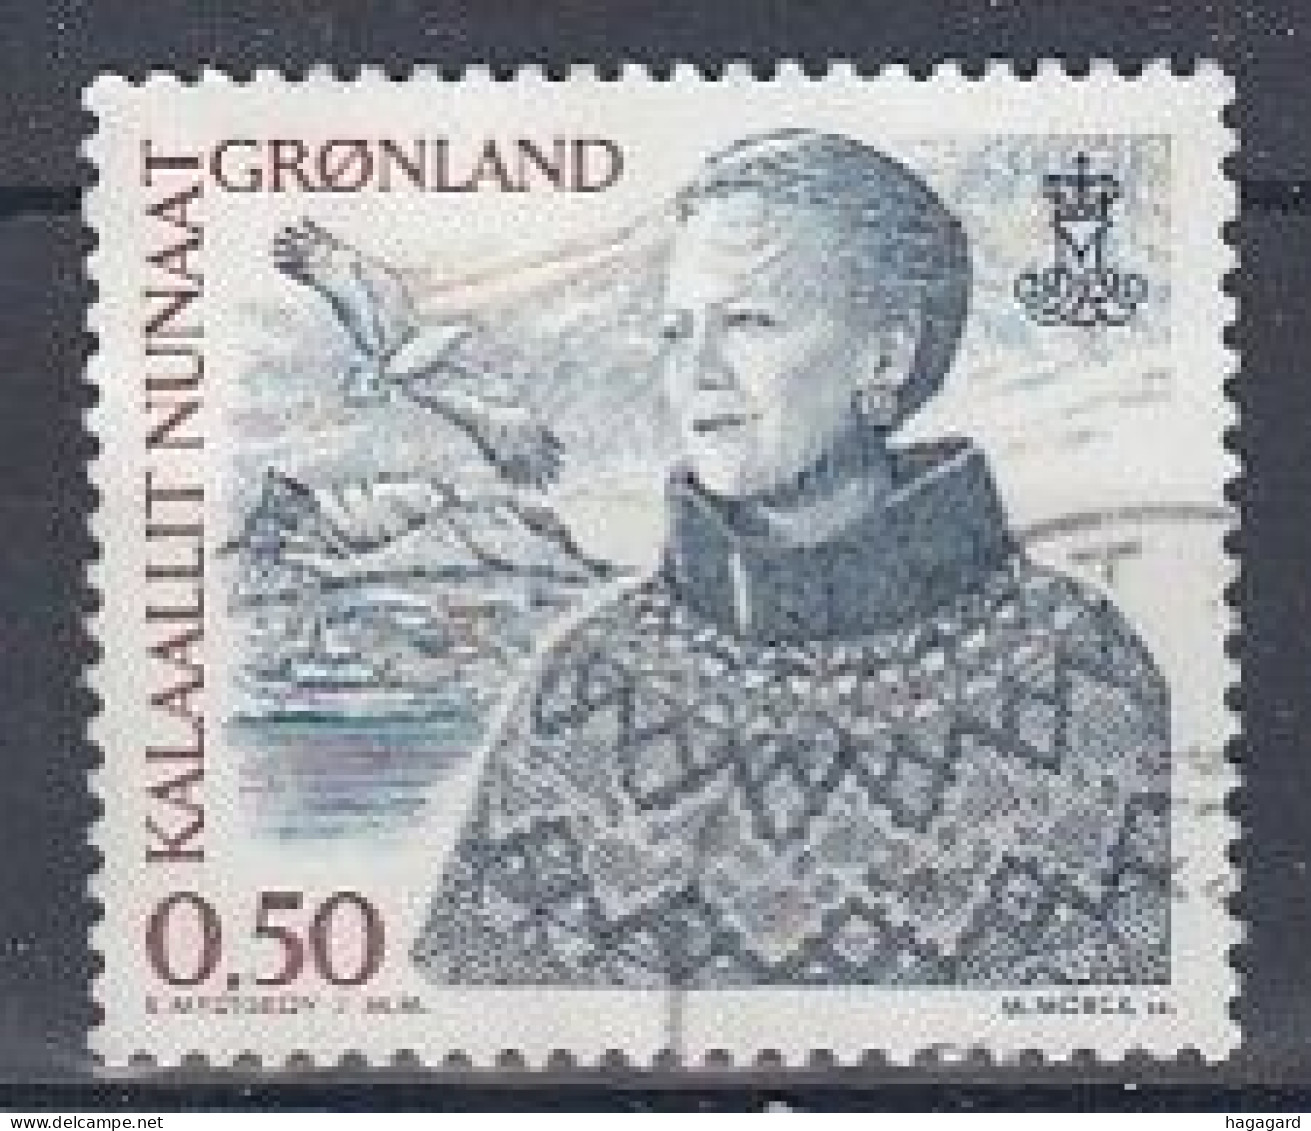 Greenland 2002. Margrethe II. Michel 386. Used - Used Stamps